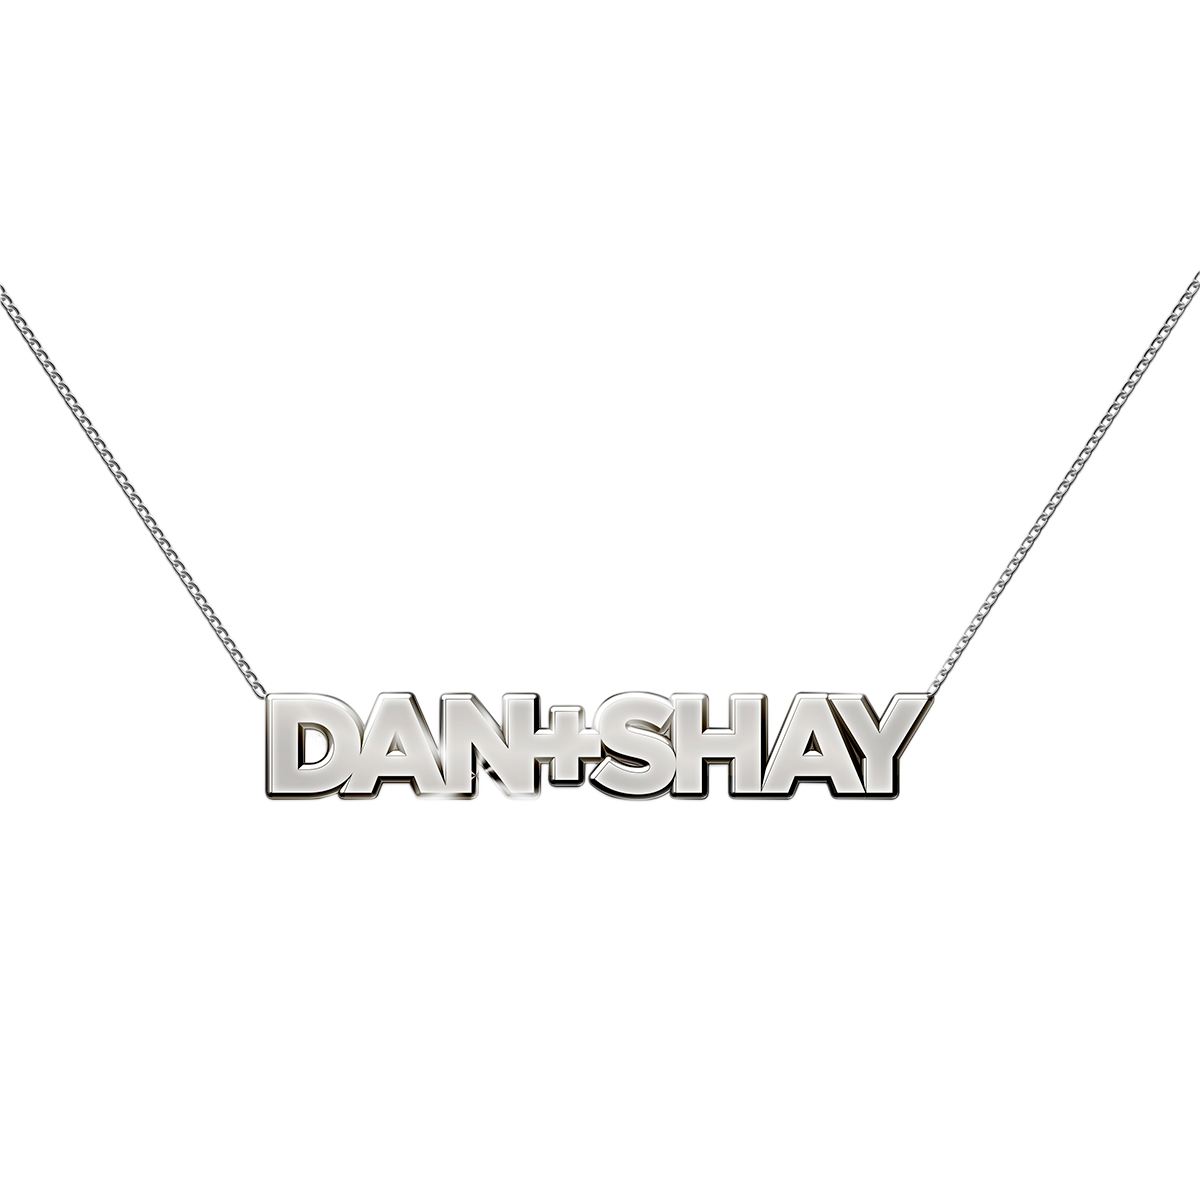 Dan Shay Png Transparent Images Pictures Photos Png Arts